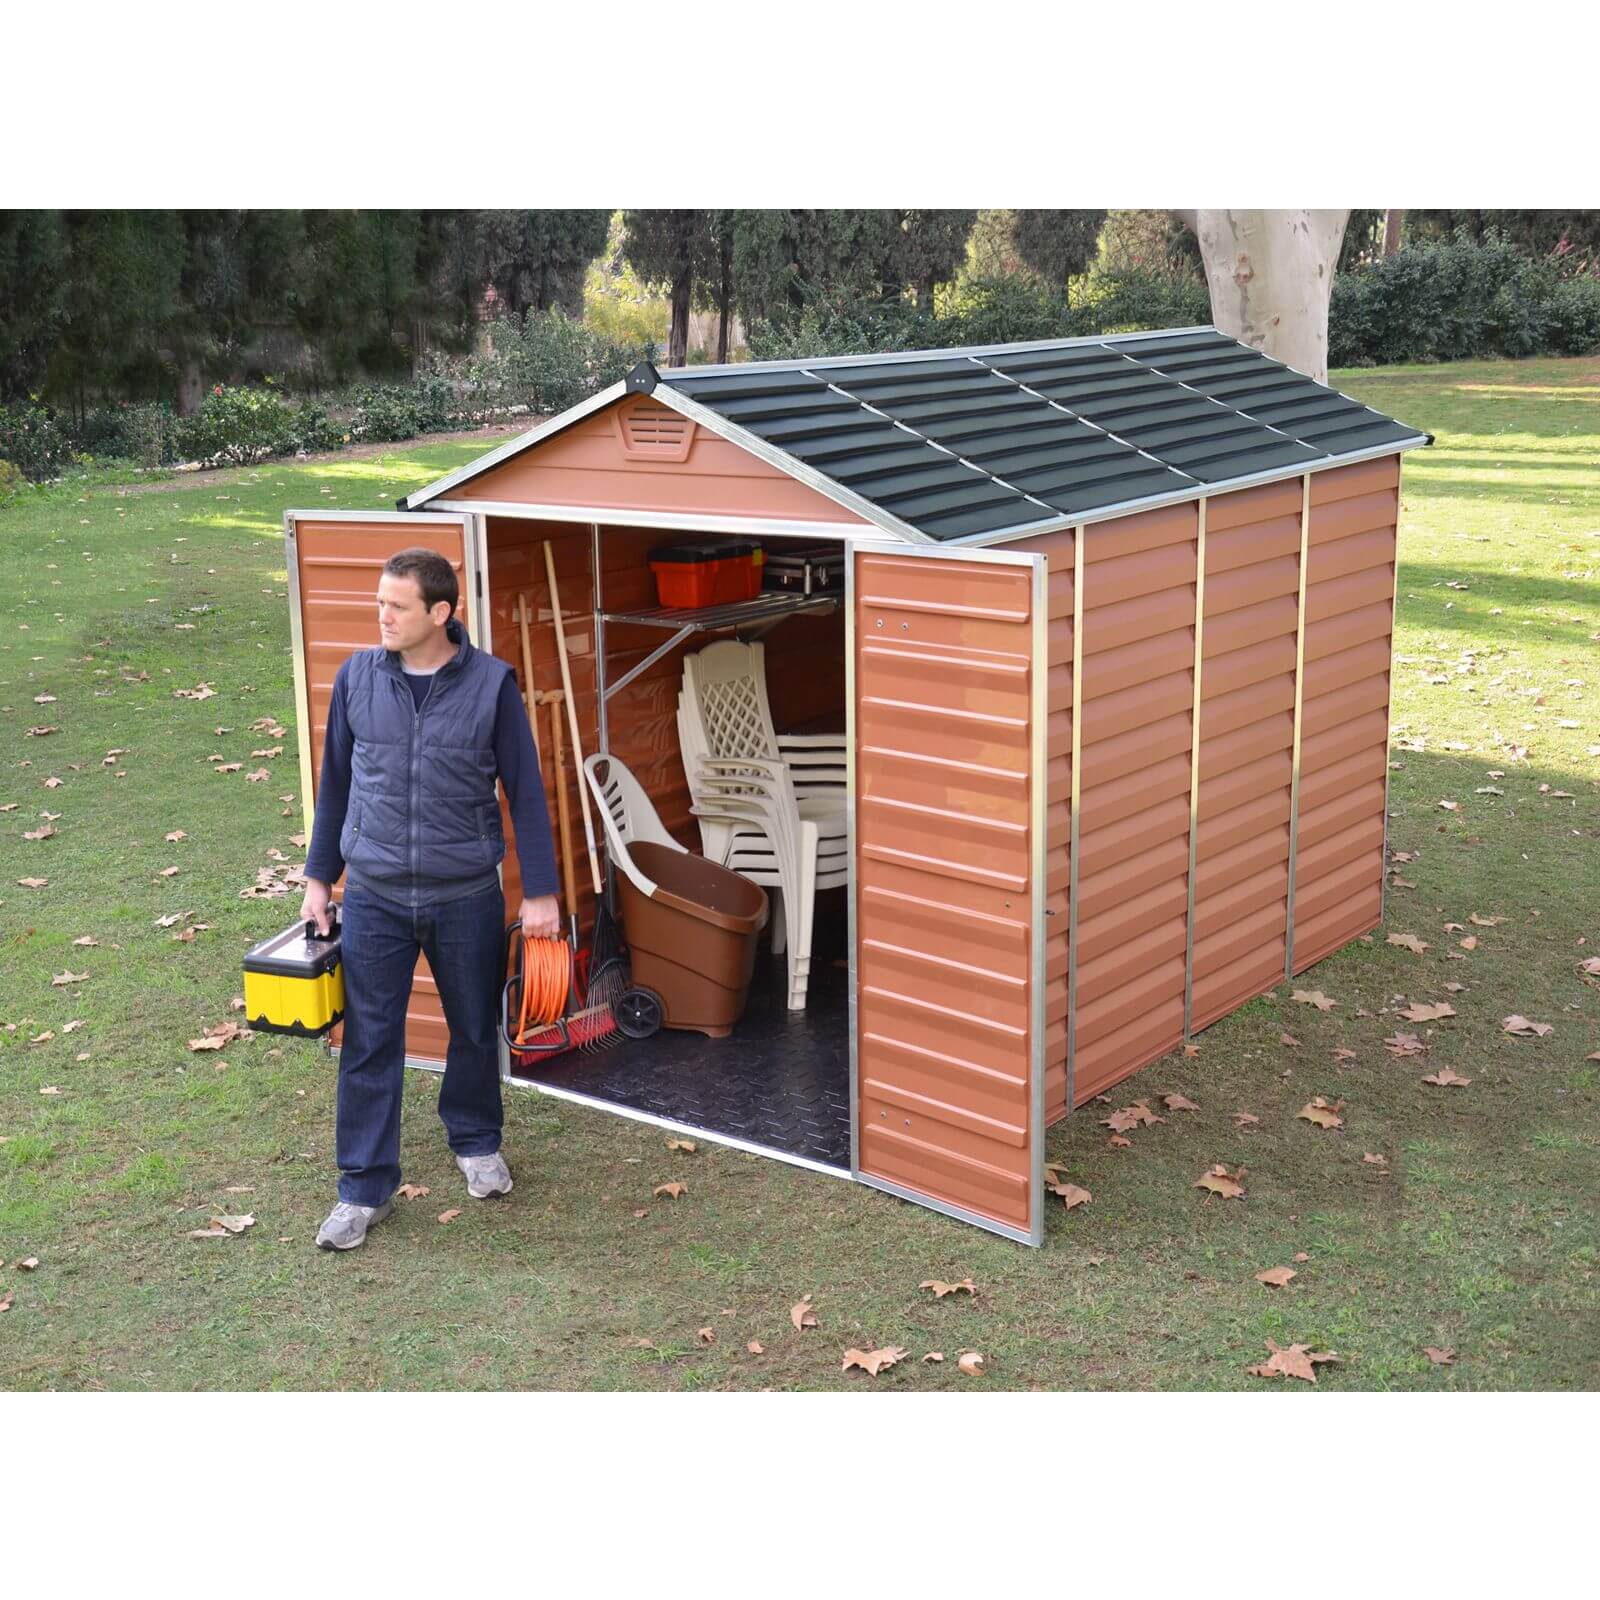 Palram SkyLight 6x10ft Amber Apex Shed